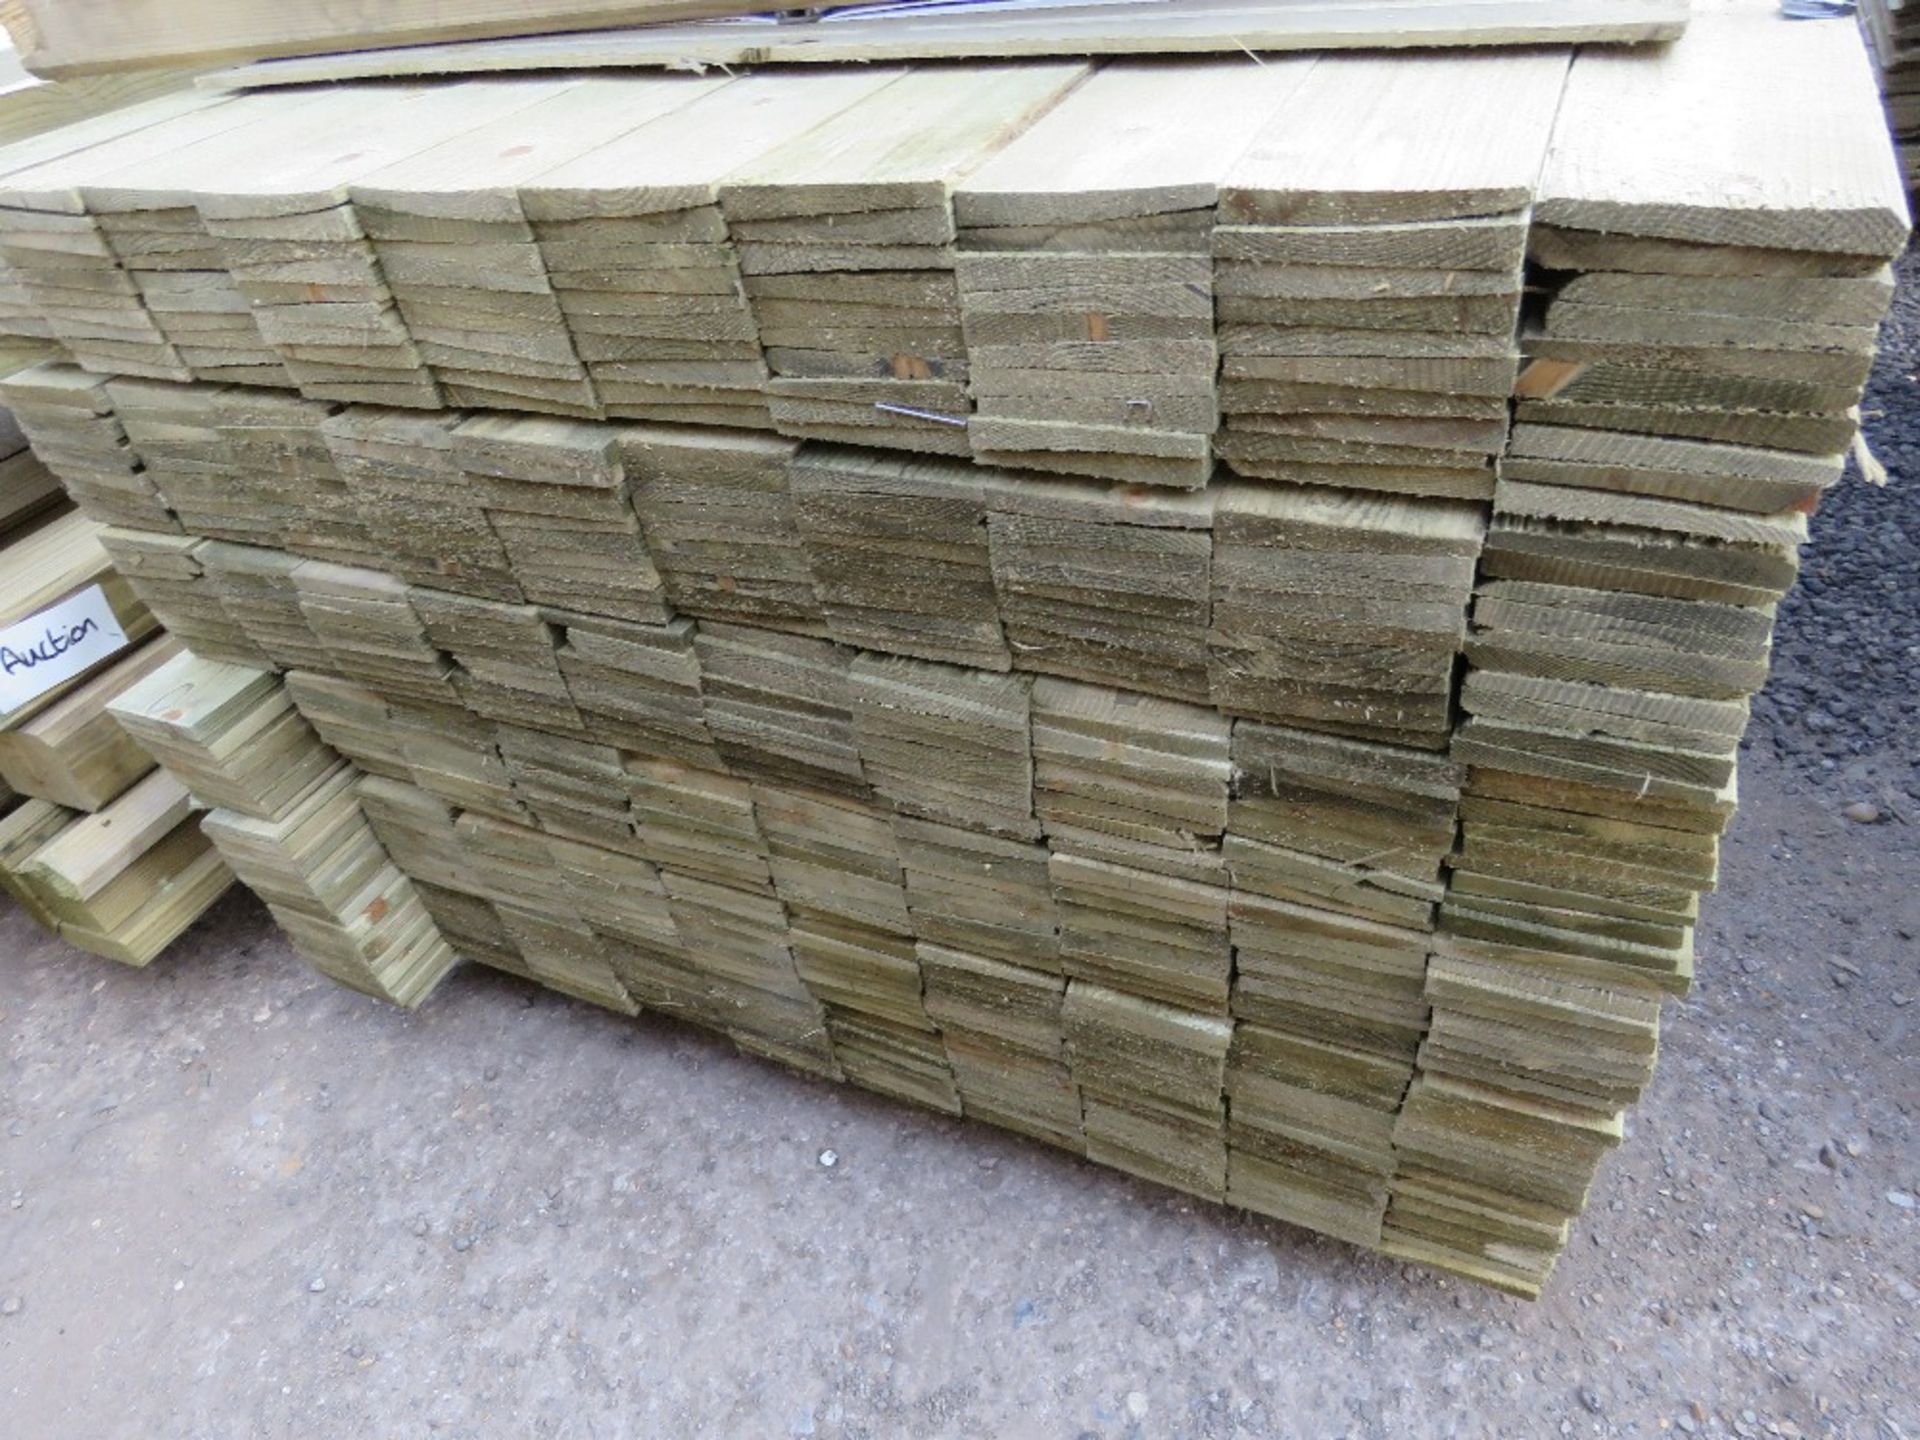 LARGE PACK OF PRESSURE TREATED FEATHER EDGE FENCE CLADDING BOARDS. 1.8M LENGTH X 100MM WIDTH APPROX. - Image 2 of 3